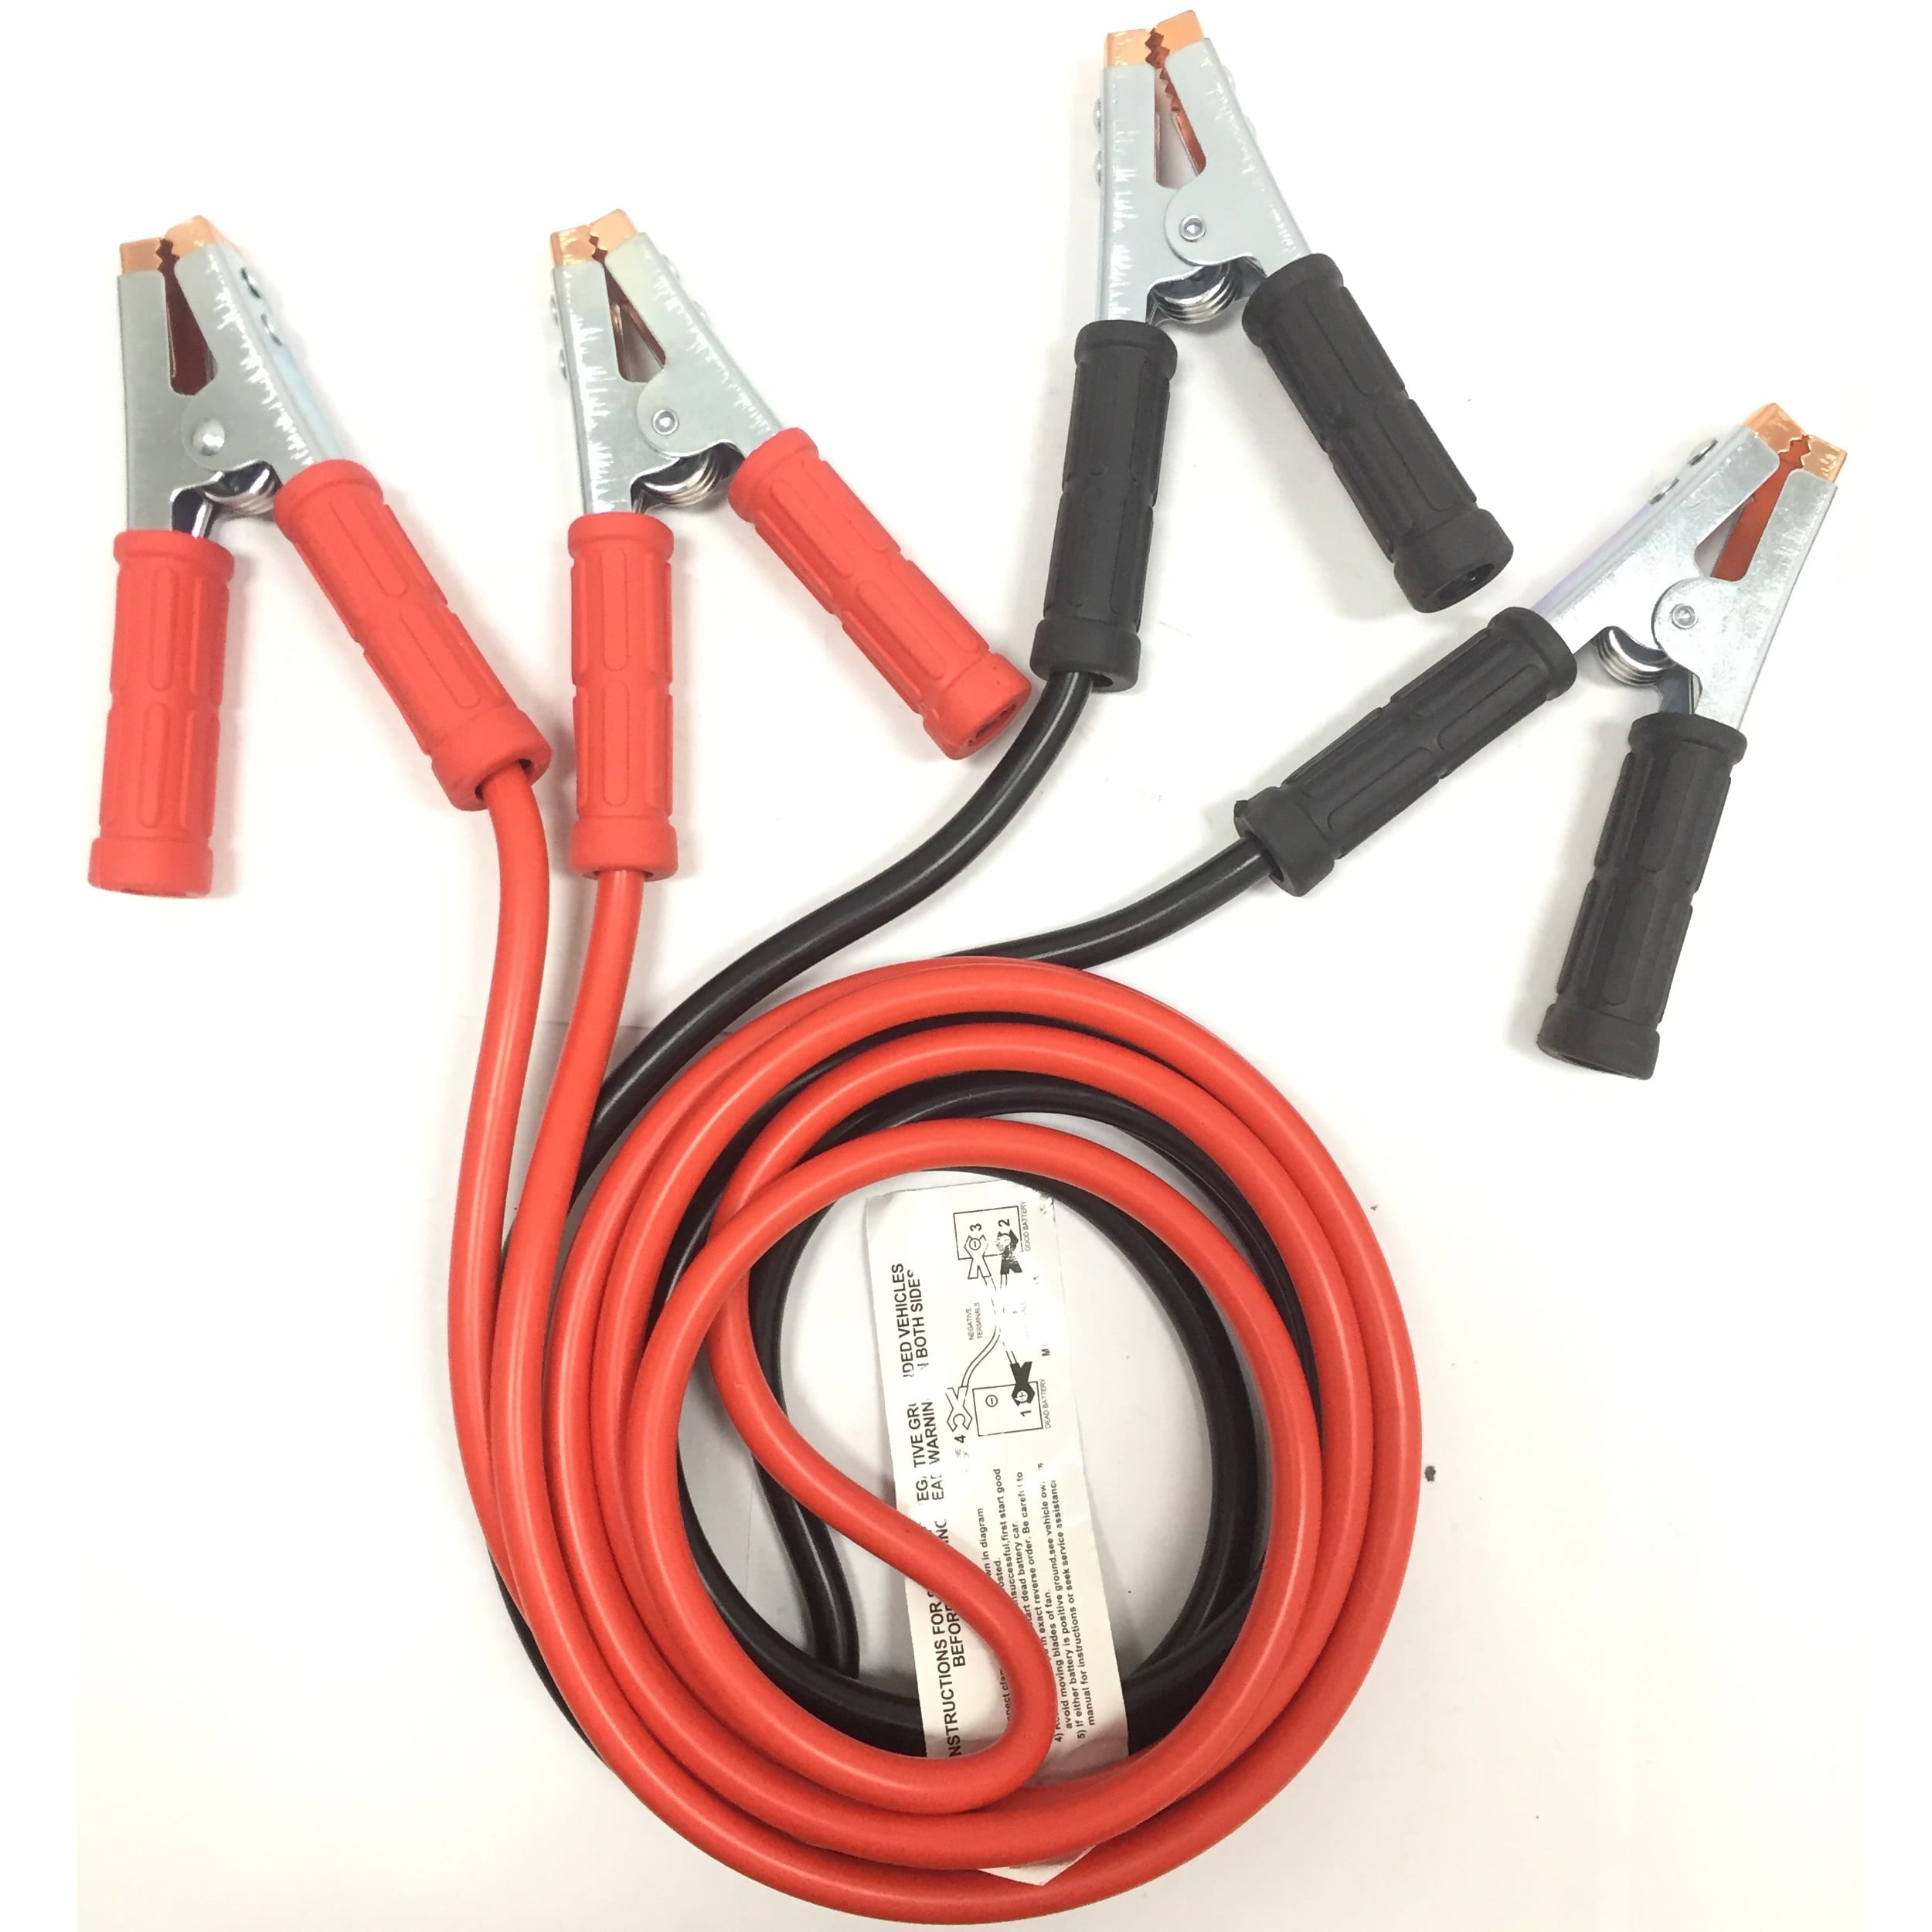 Streetwize Heavy Duty Booster Cables 165 Amp Engines up to 160cc Jump Leads 